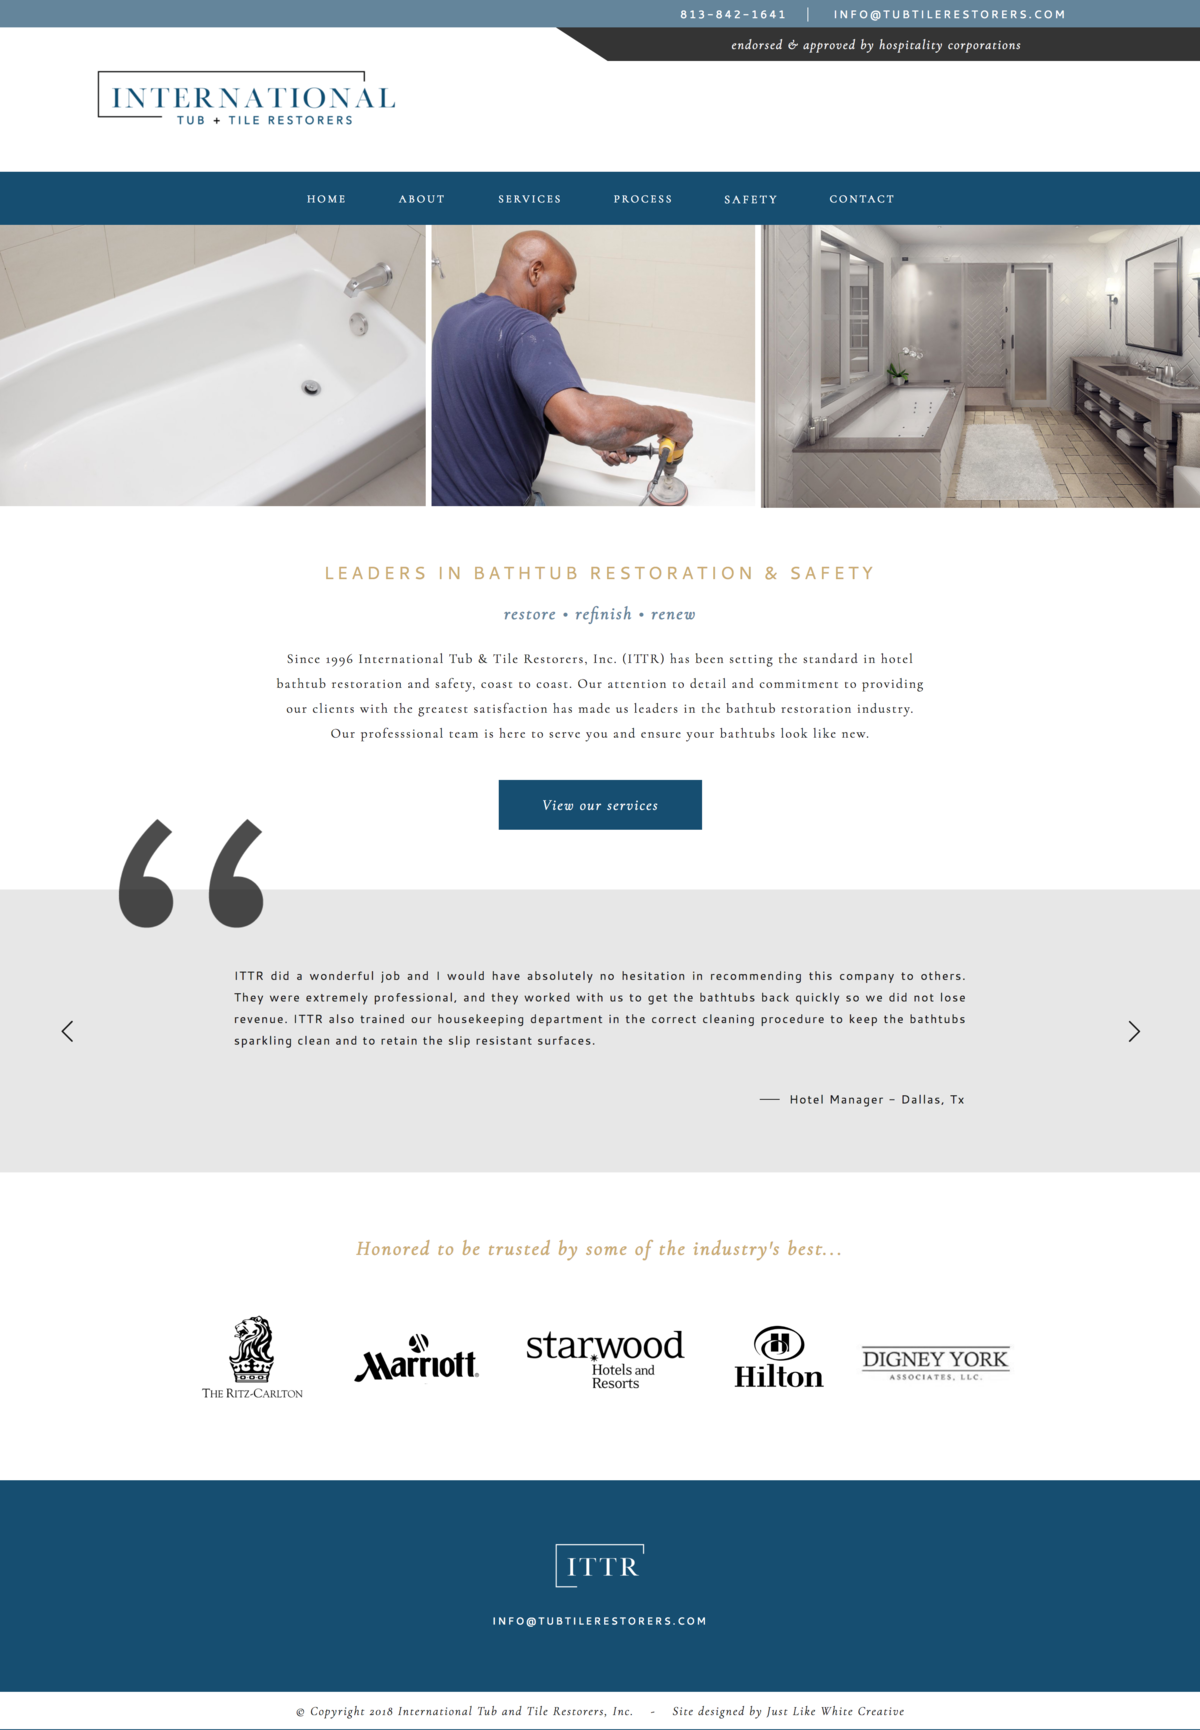 Clean, professional website design by Tribble Design Co.